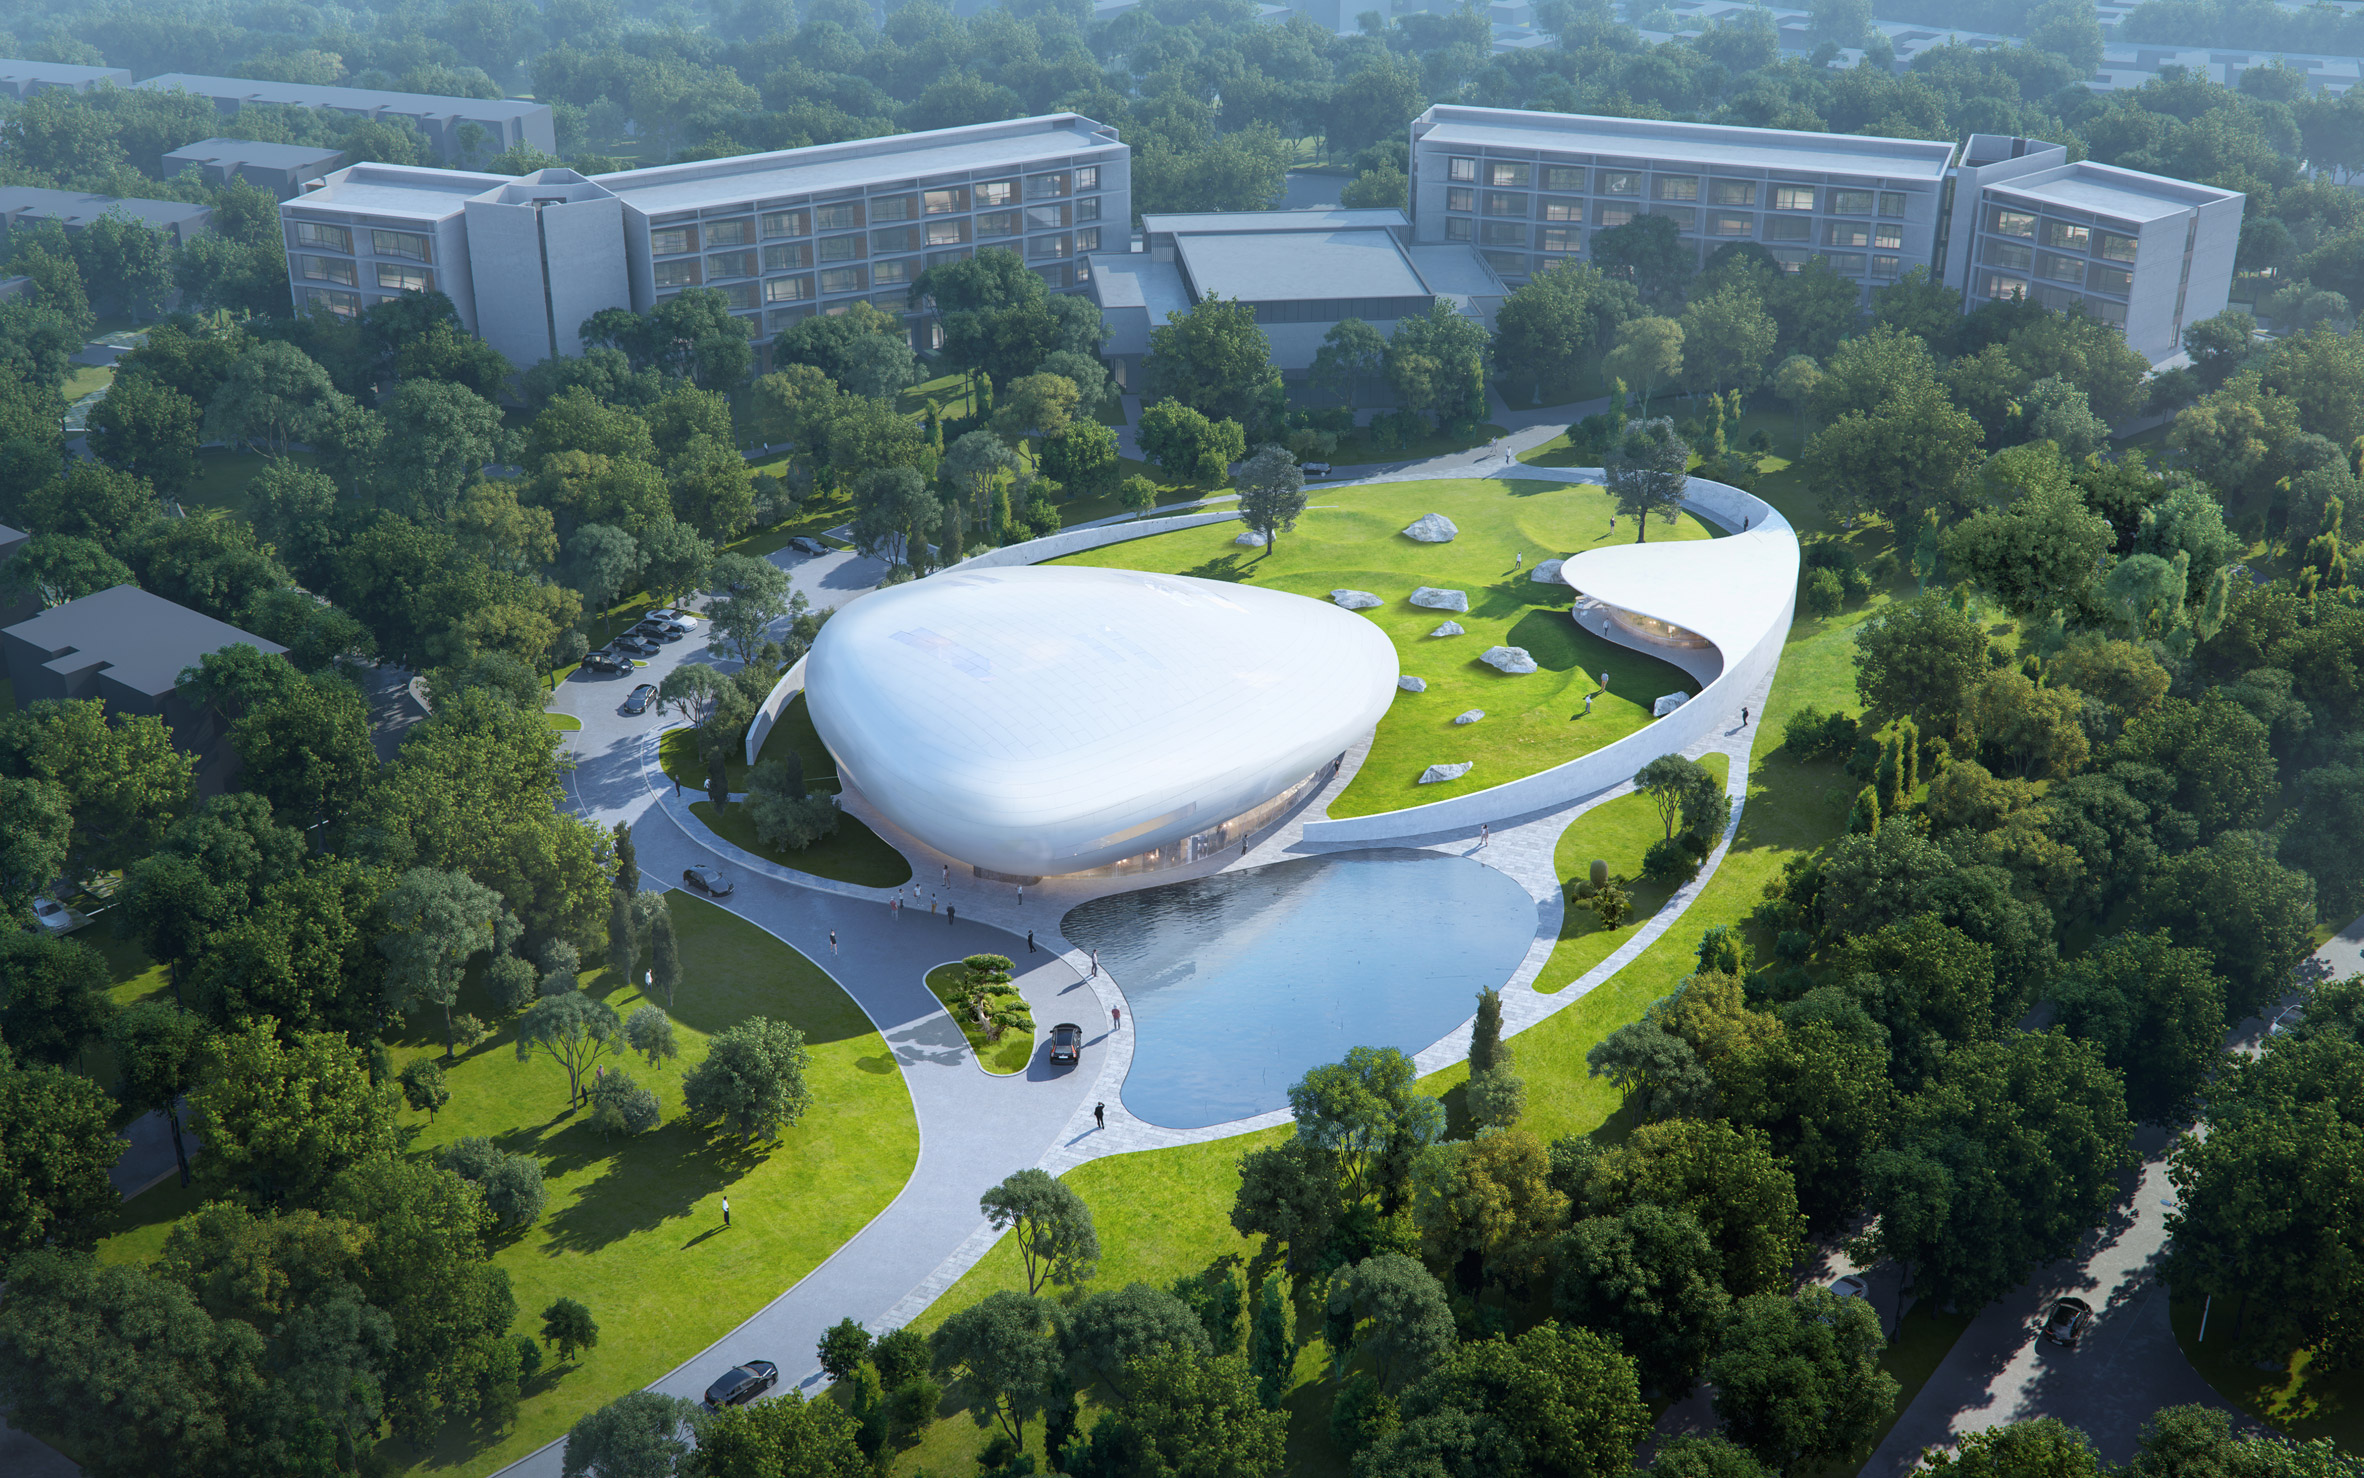 The Cloud Center in China